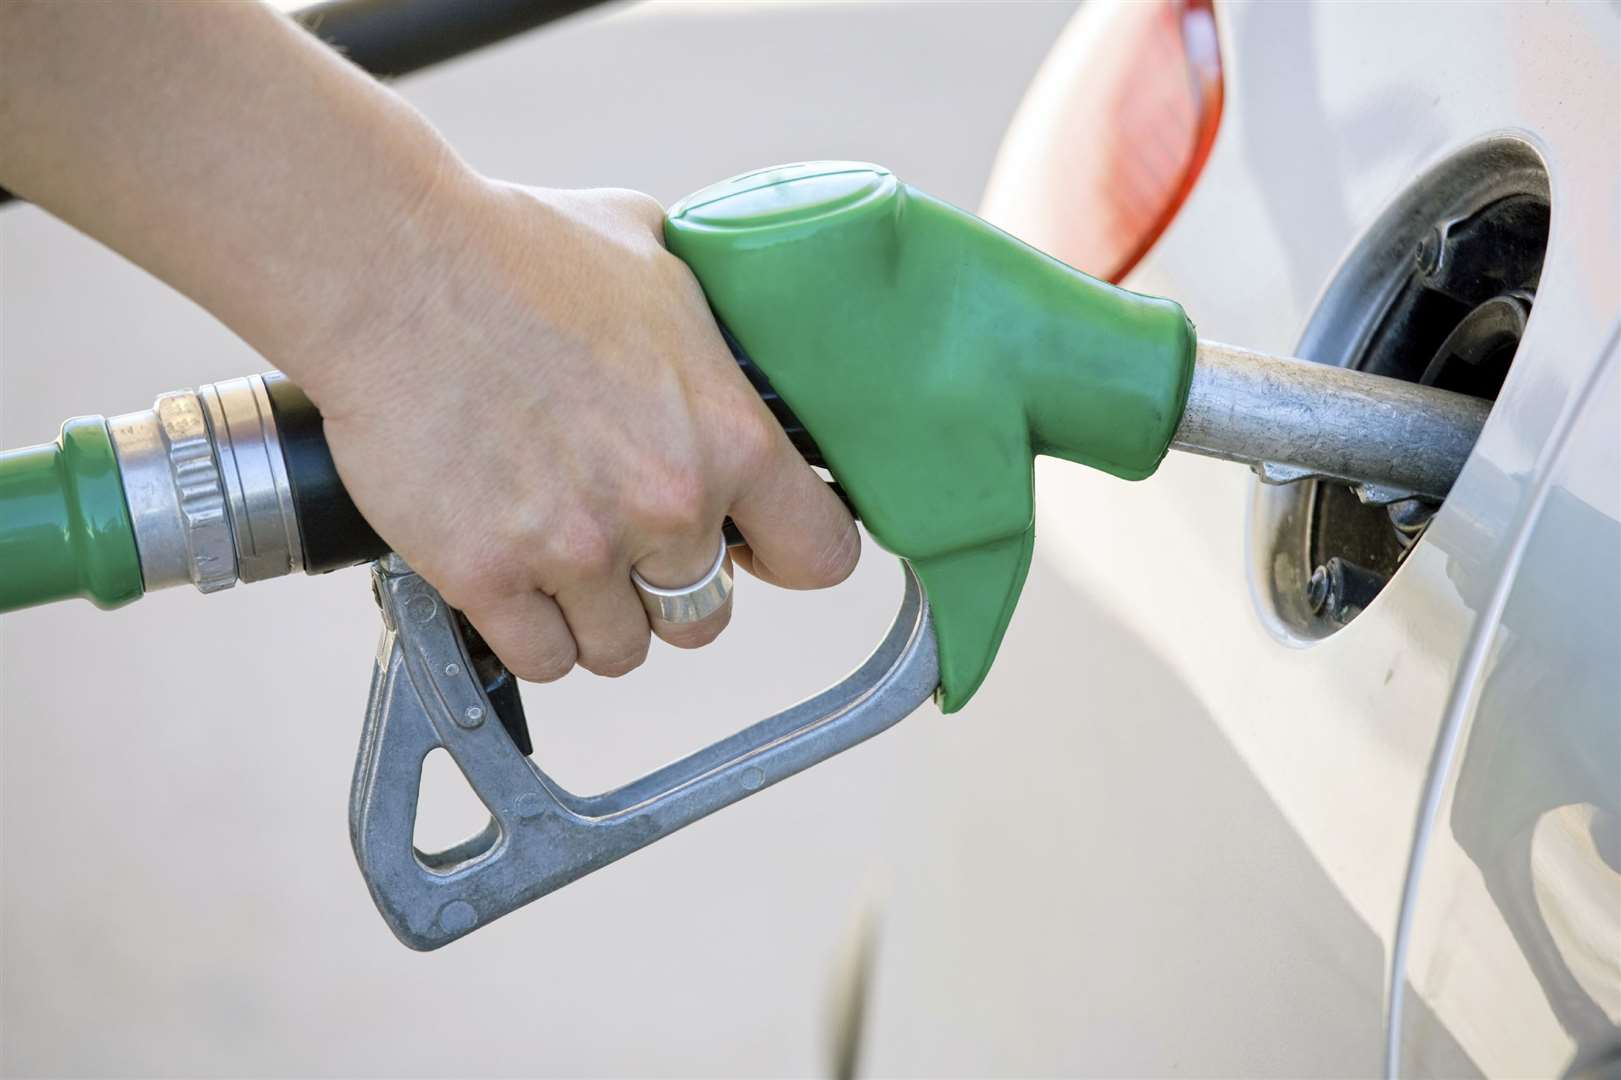 Kevin Carr was charged with more than 20 fuel-related offences. Photo by: istock.